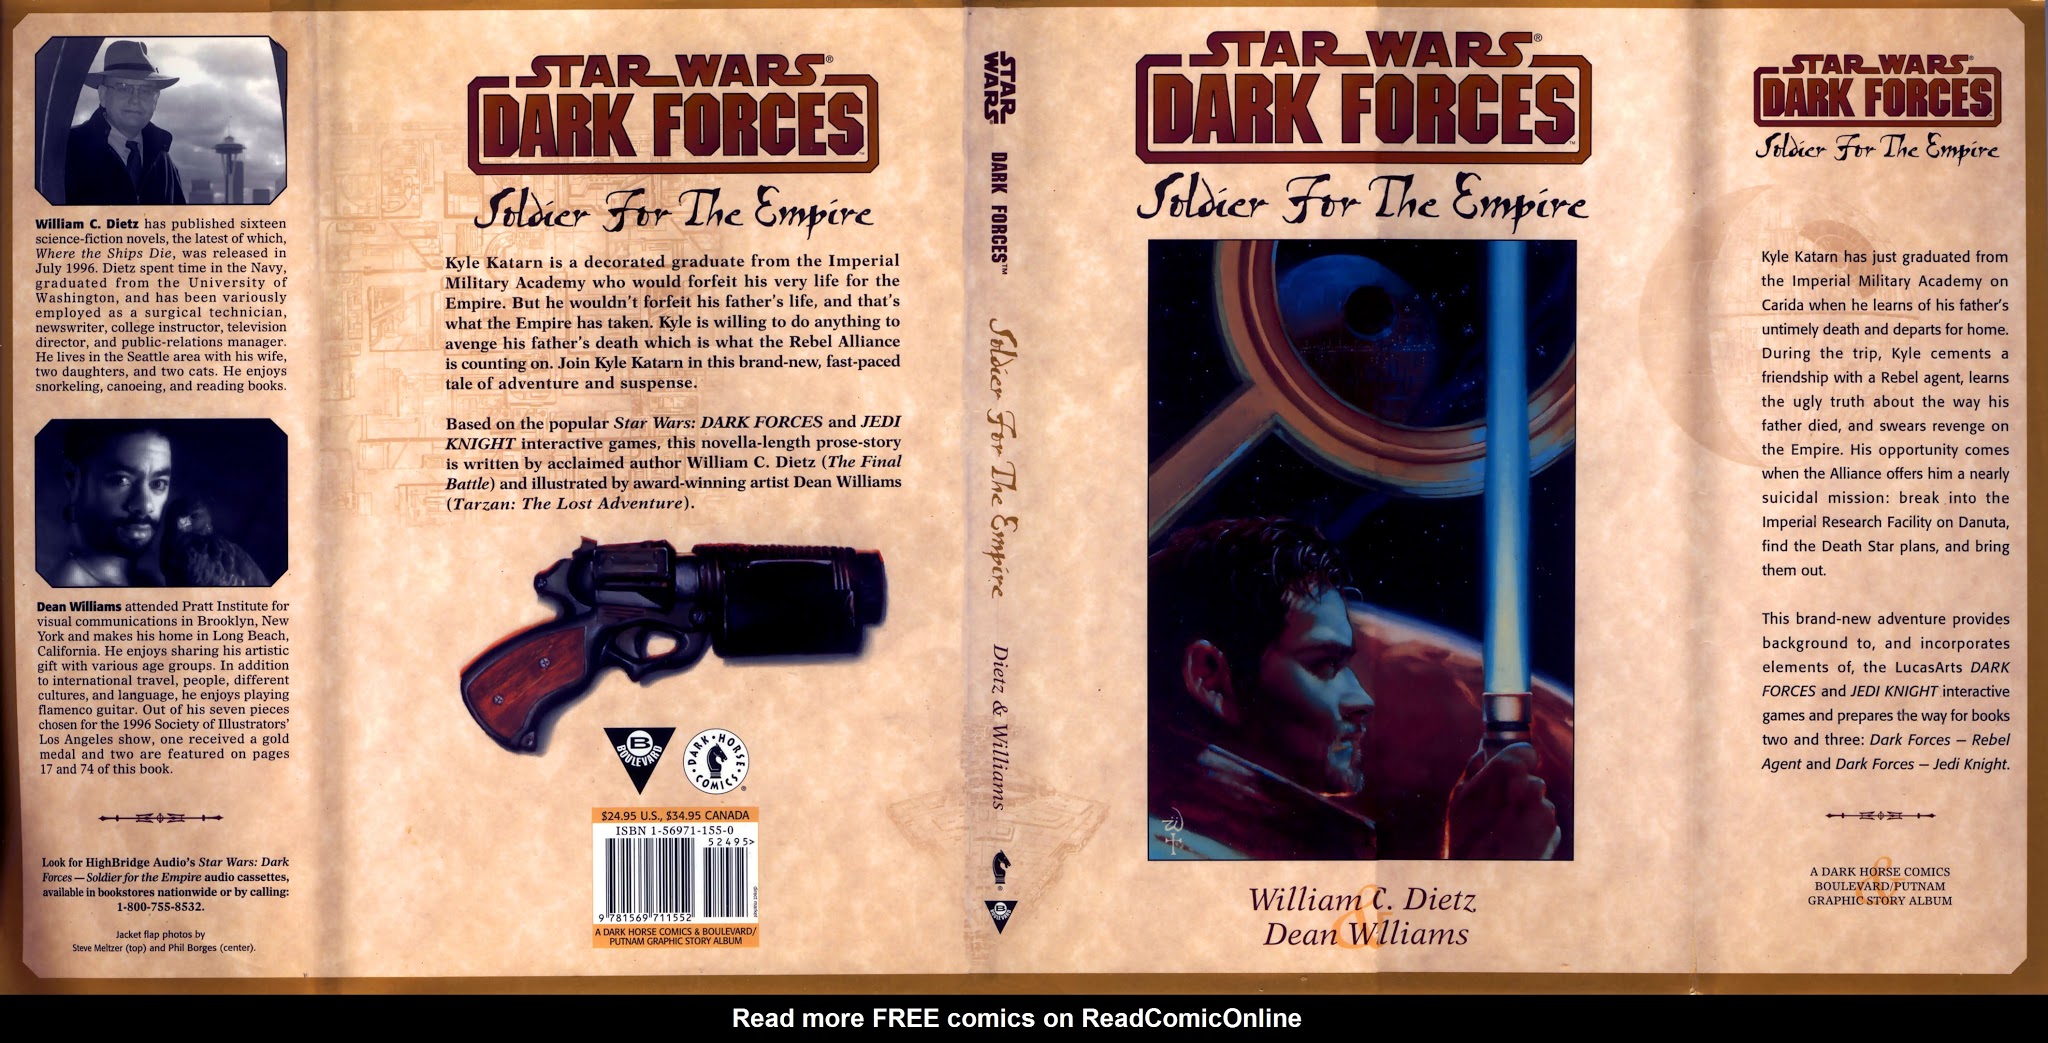 Read online Star Wars: Dark Forces comic -  Issue # TPB Soldier for the Empire - 1